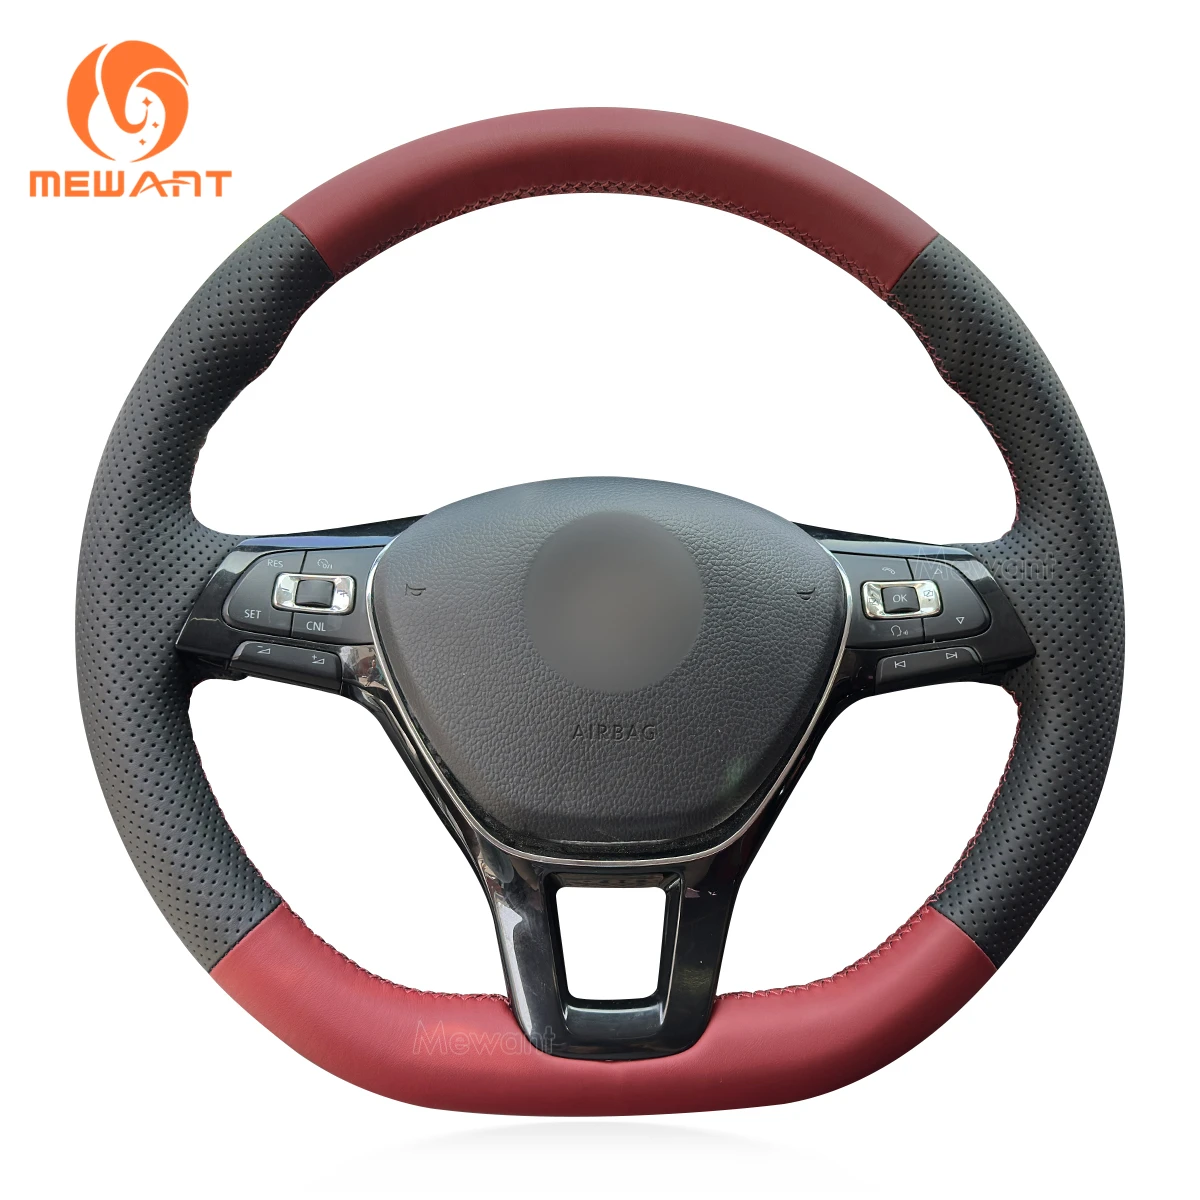 

MEWANT Real Leather Car Steering Wheel Cover for Volkswagen VW Golf 7 Polo 5 Arteon Passat Tiguan T-Roc e-Golf 2013-2021